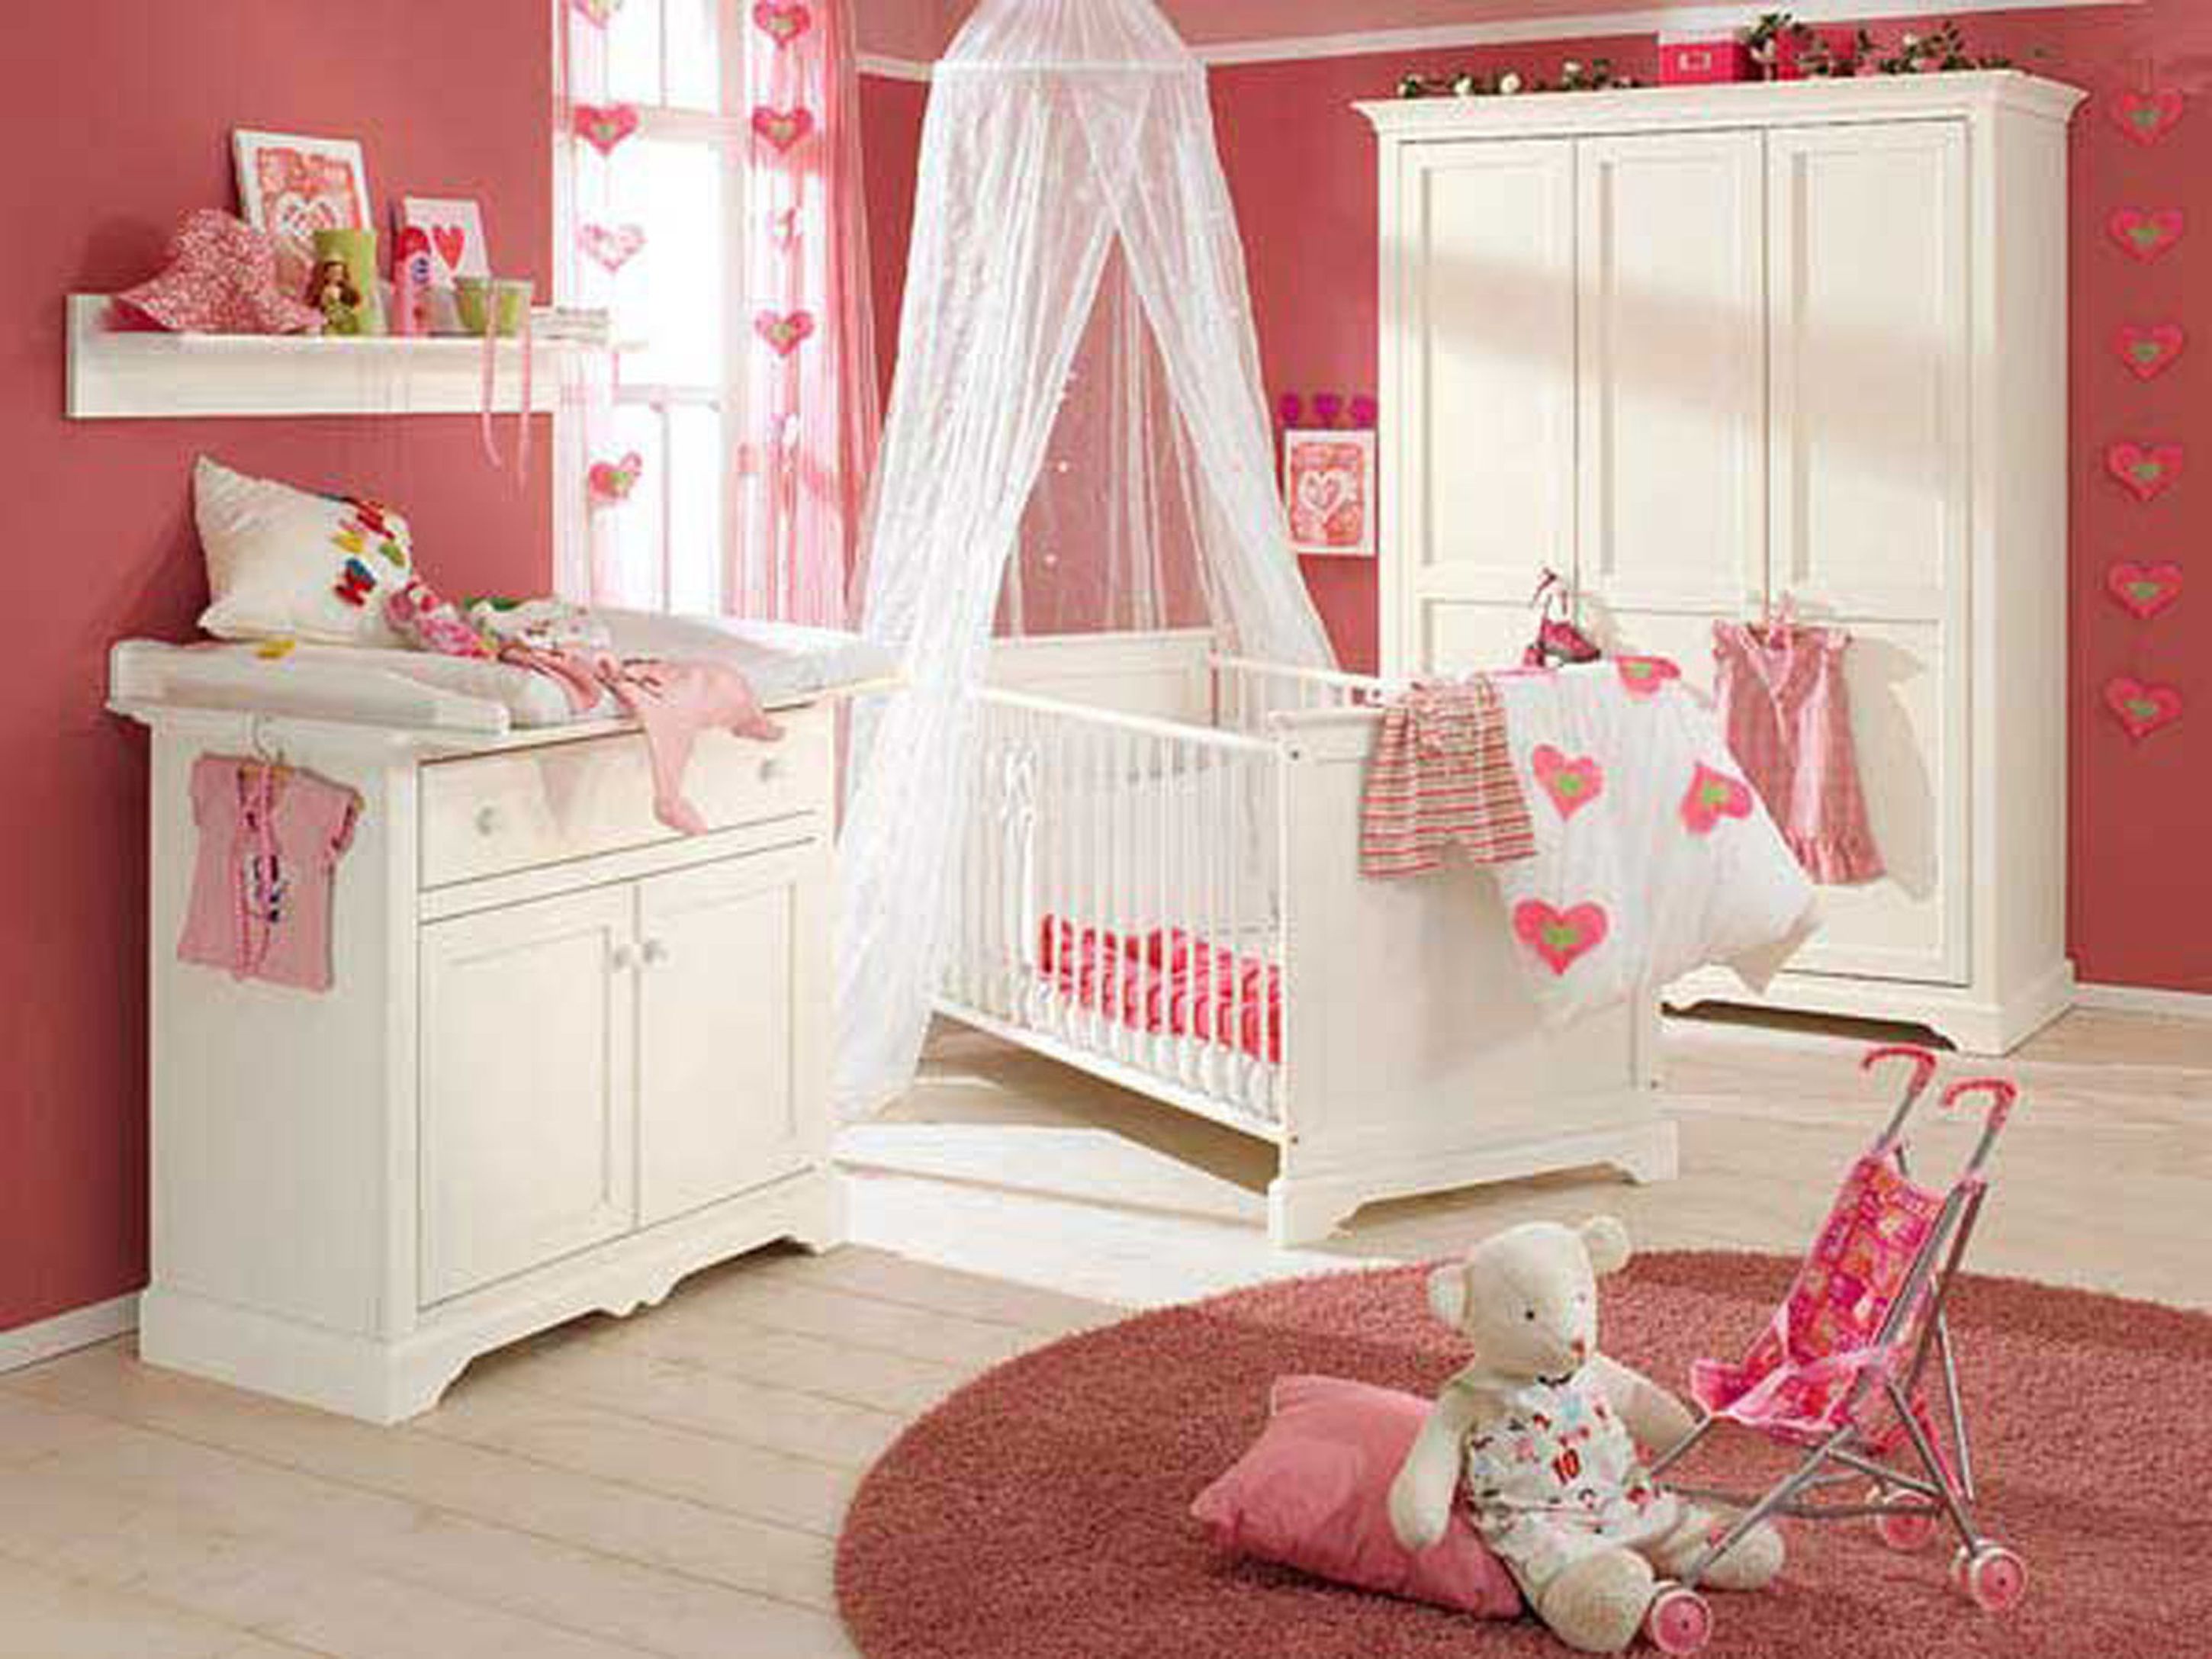 Romantic White Baby Room Design Idea With White Crib With White Curtain White Wardrobe And White Cabinet With White Pillow Cute Baby Room Design Ideas (View 2 of 39)